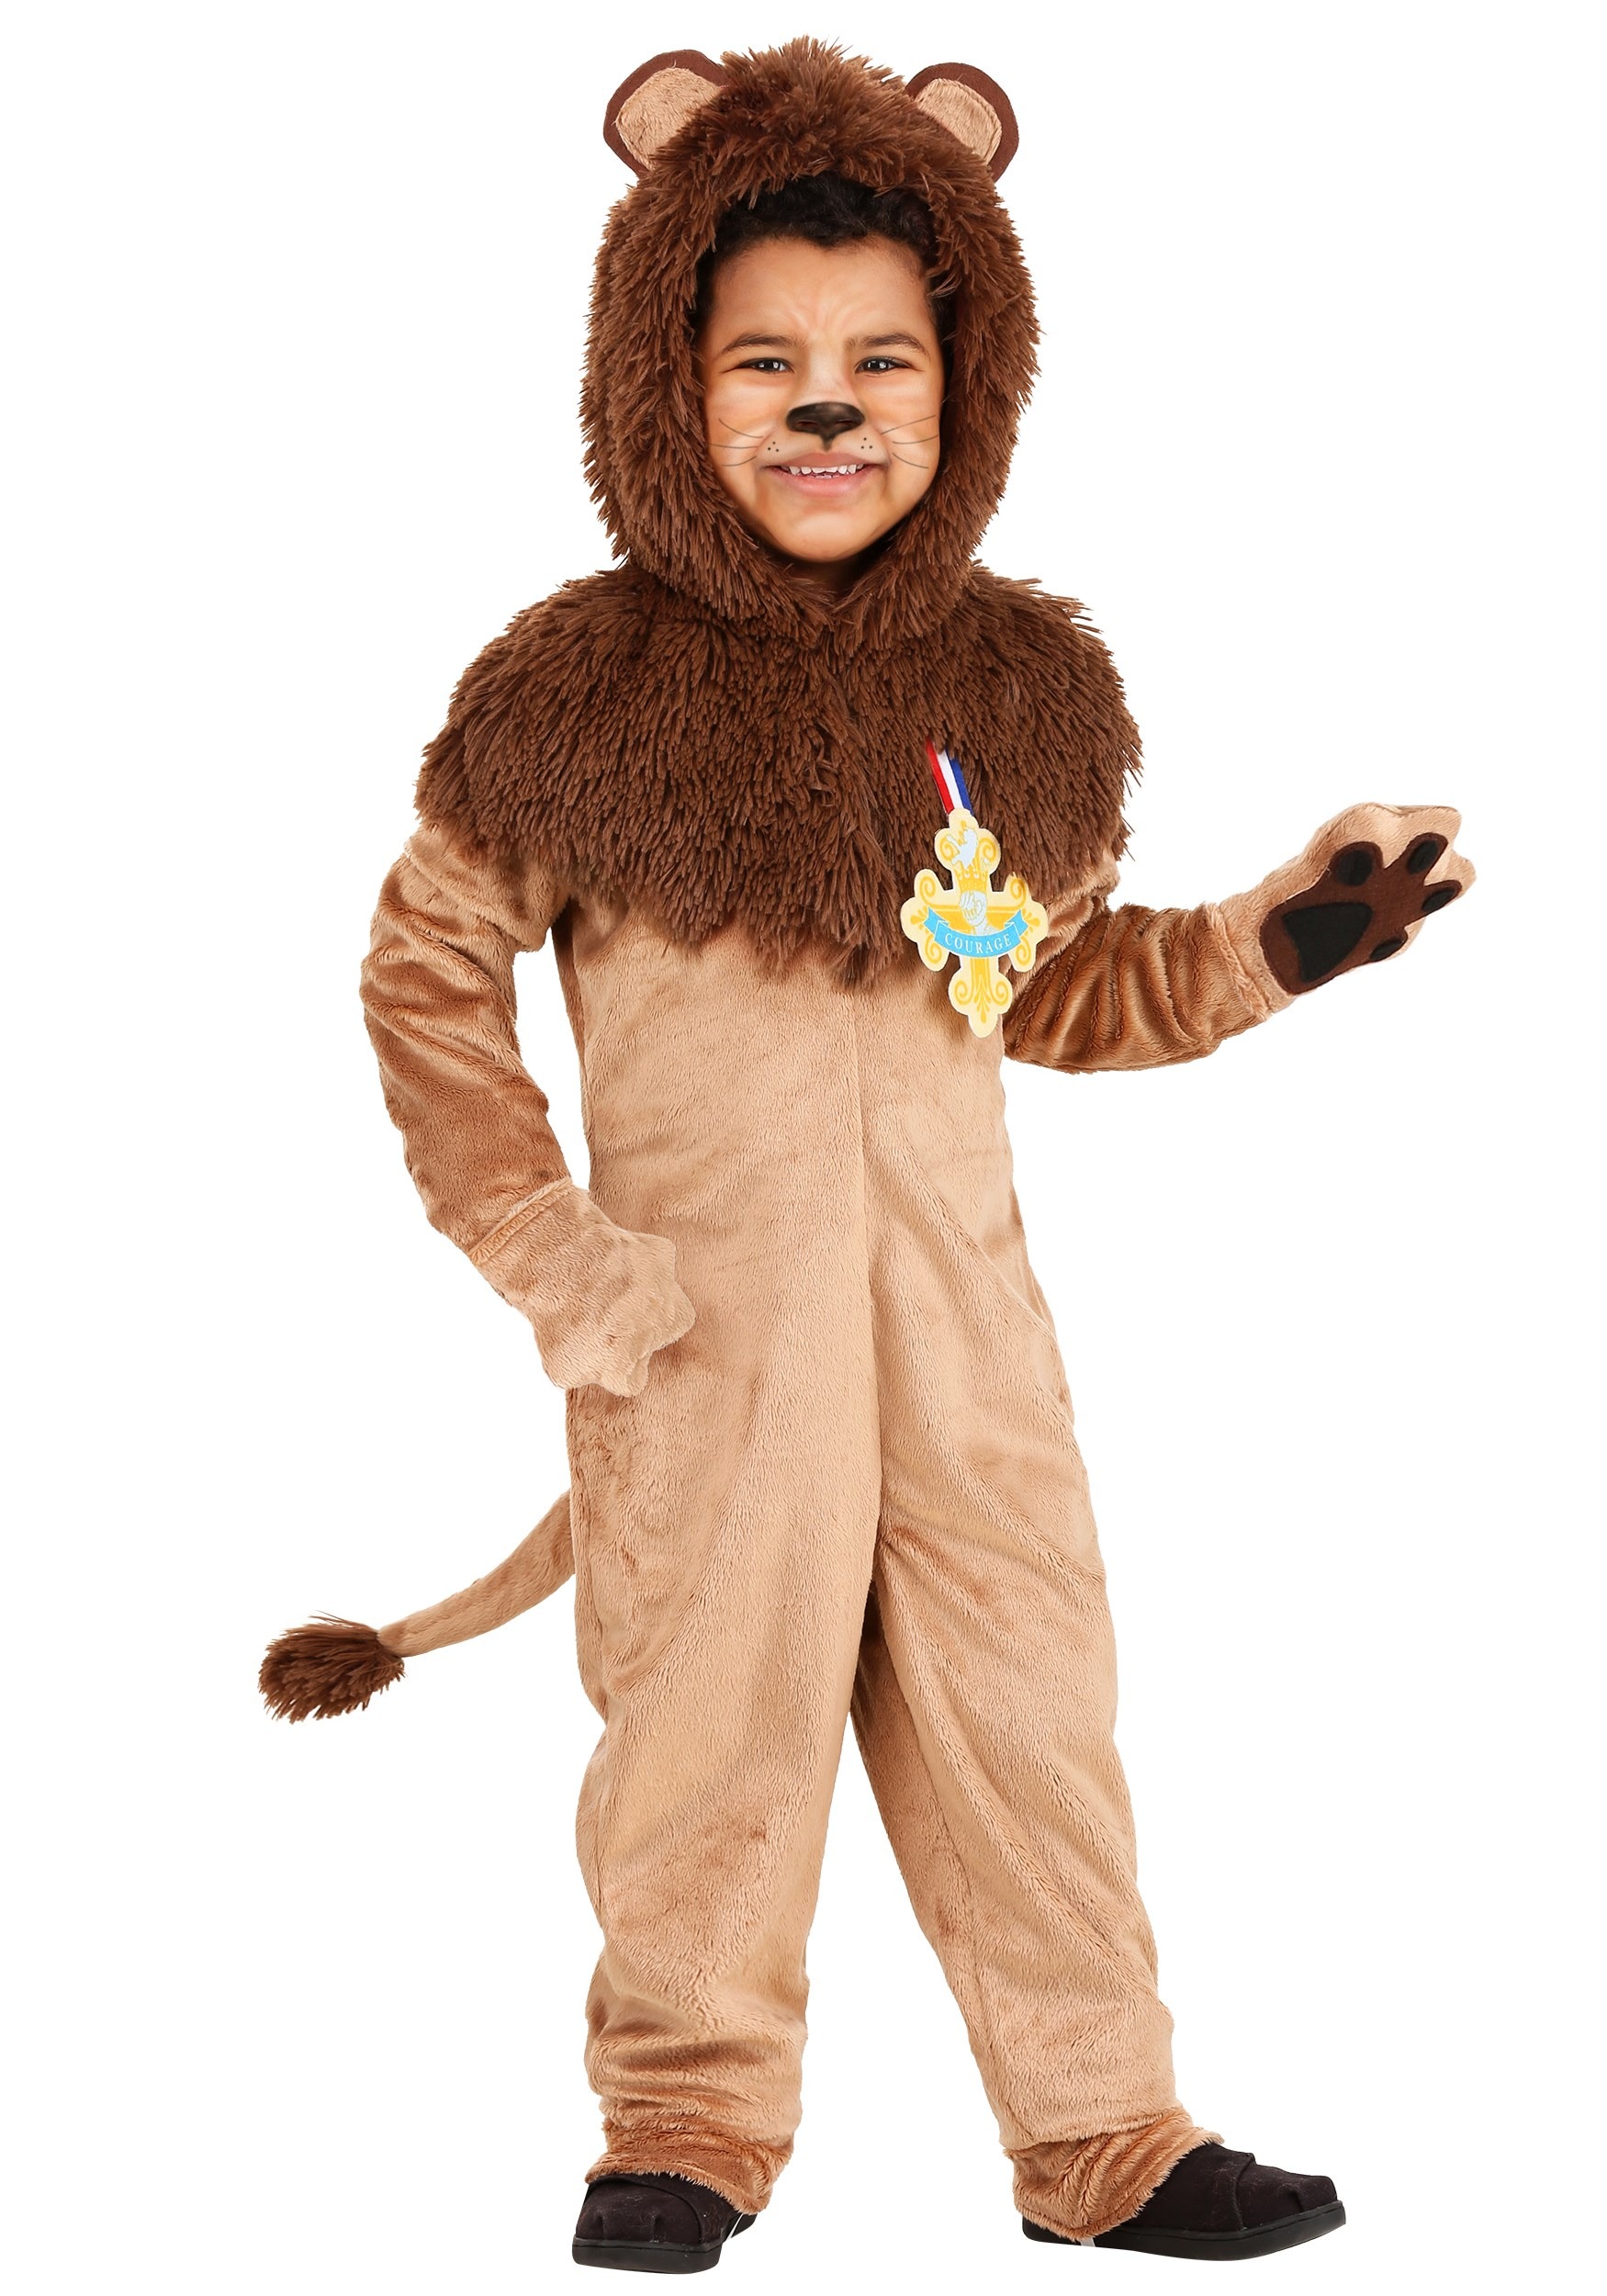 Photos - Fancy Dress Wizard Jerry Leigh  of Oz Toddler Cowardly Lion Costume Yellow/Brown FU 